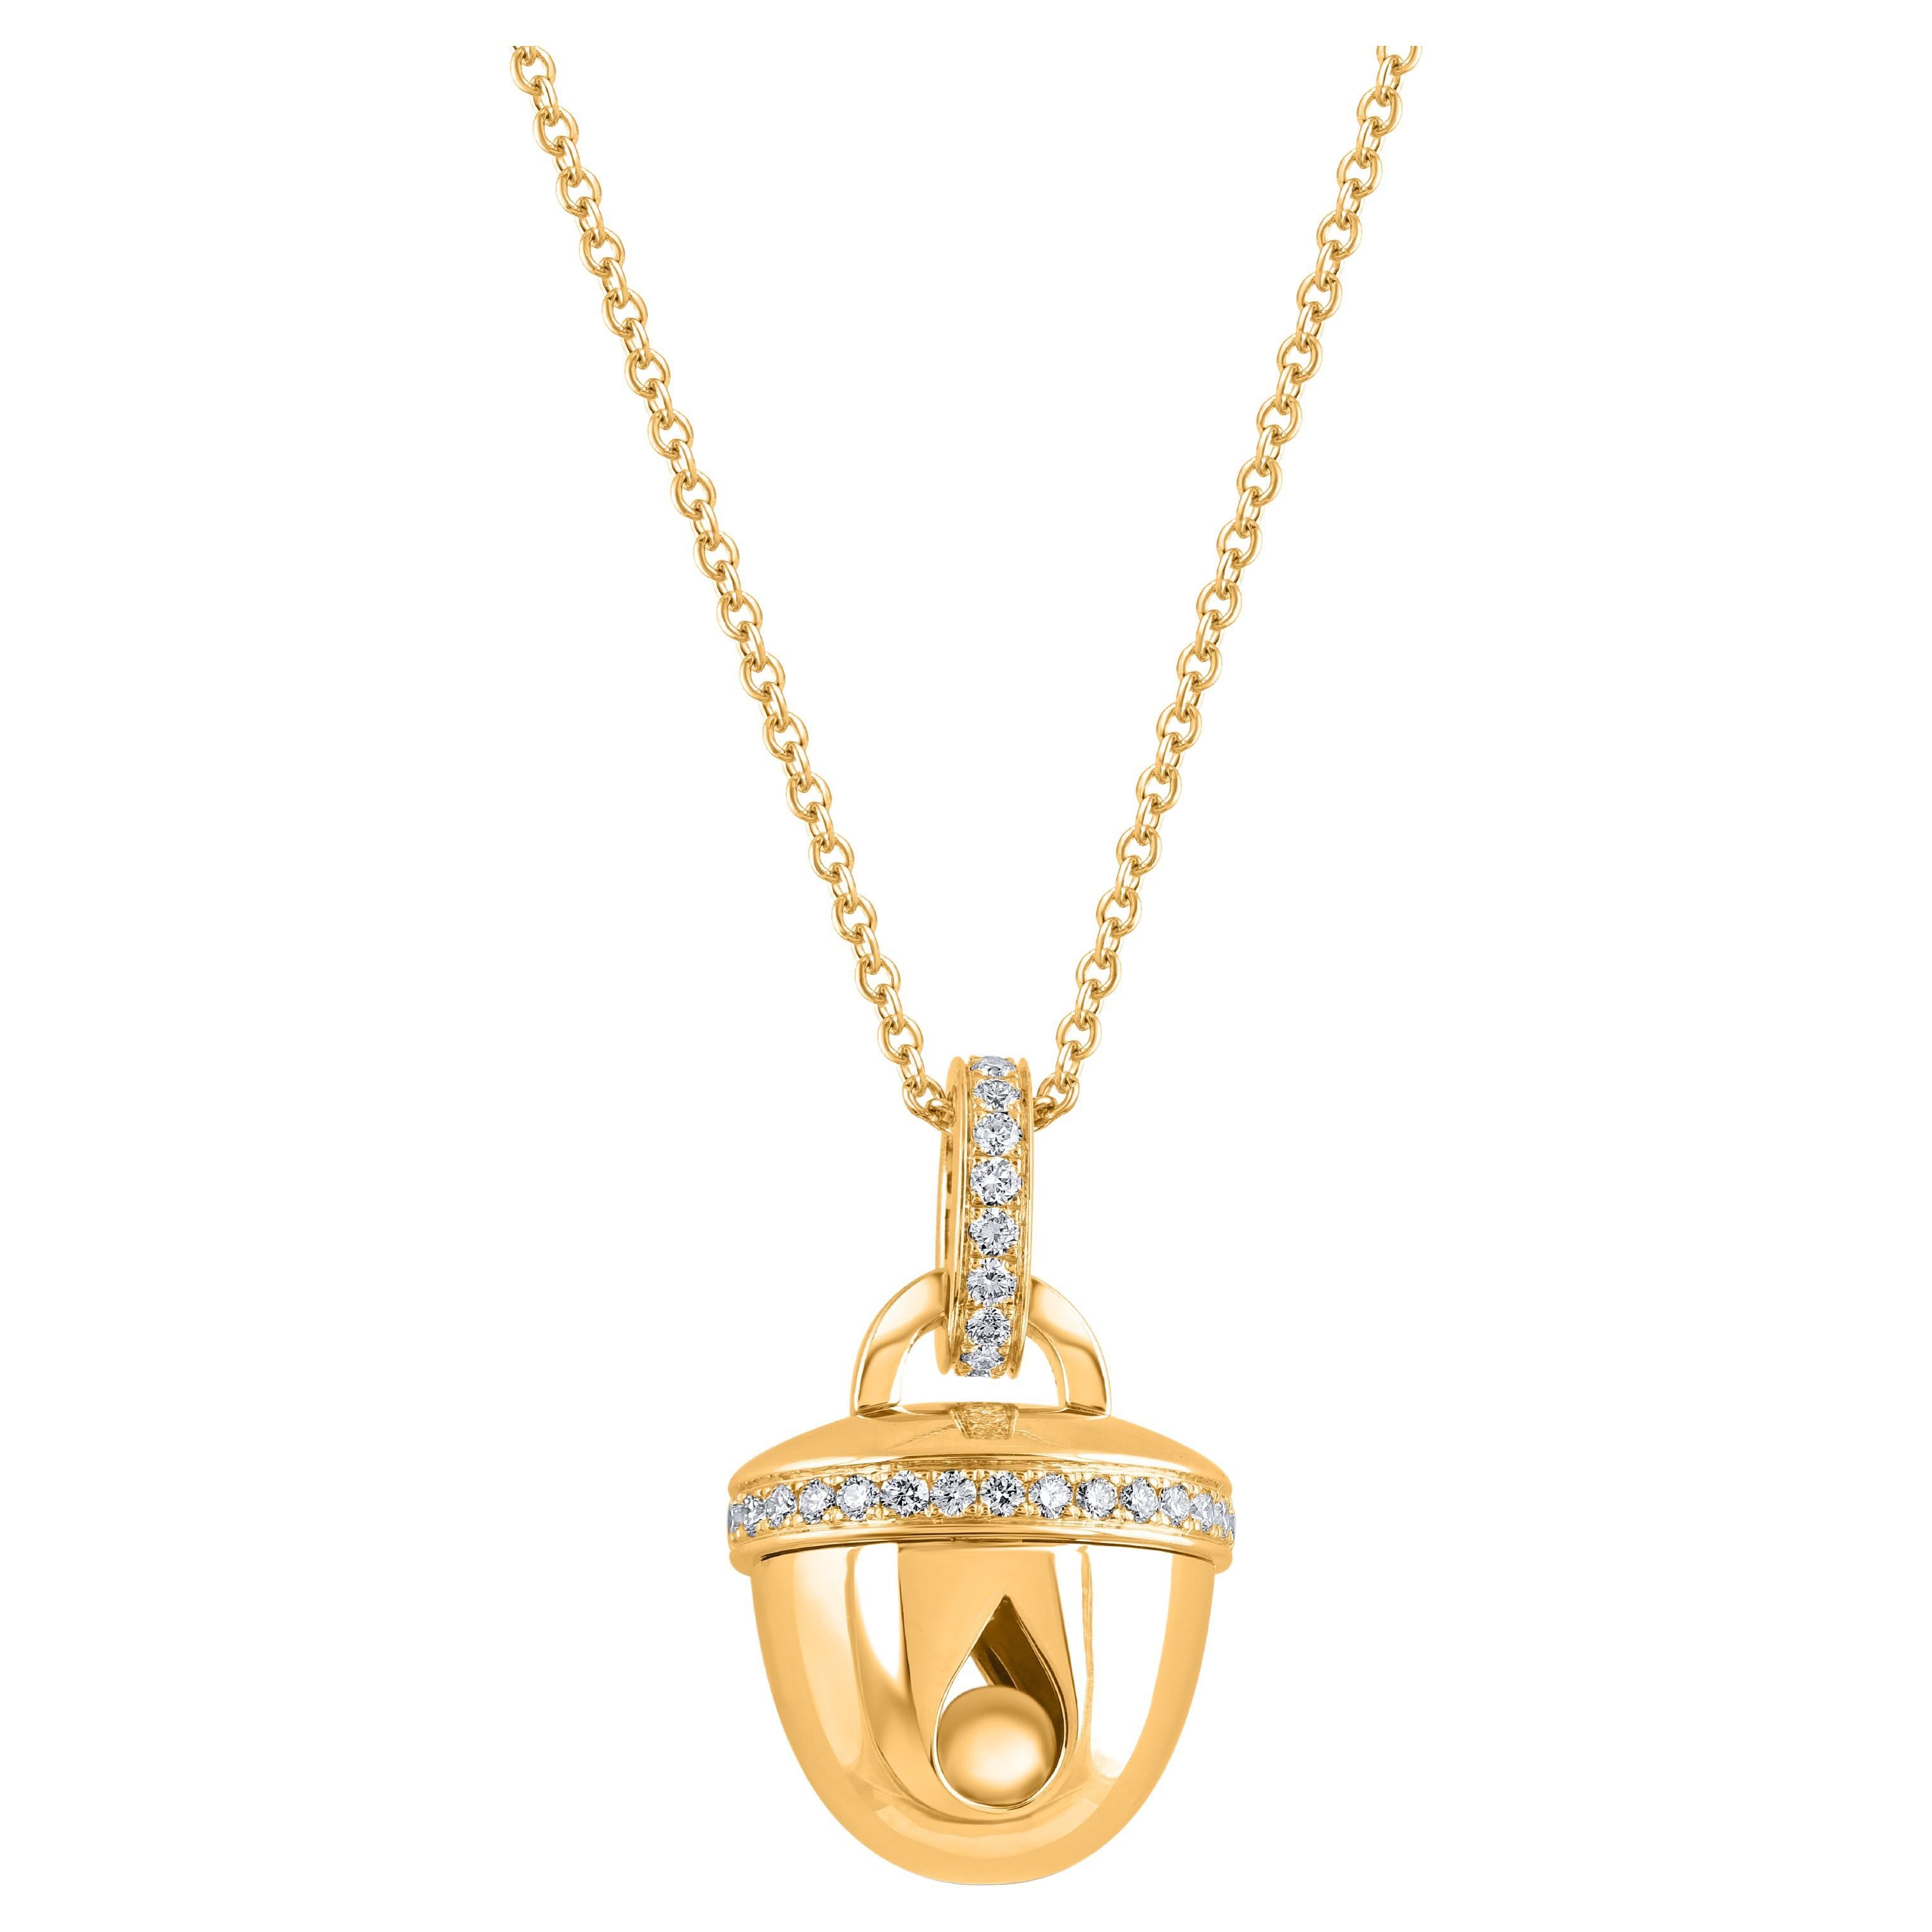 Harakh Colorless Diamond 0.25 Carat Pendant Necklace in 18 Kt Yellow Gold